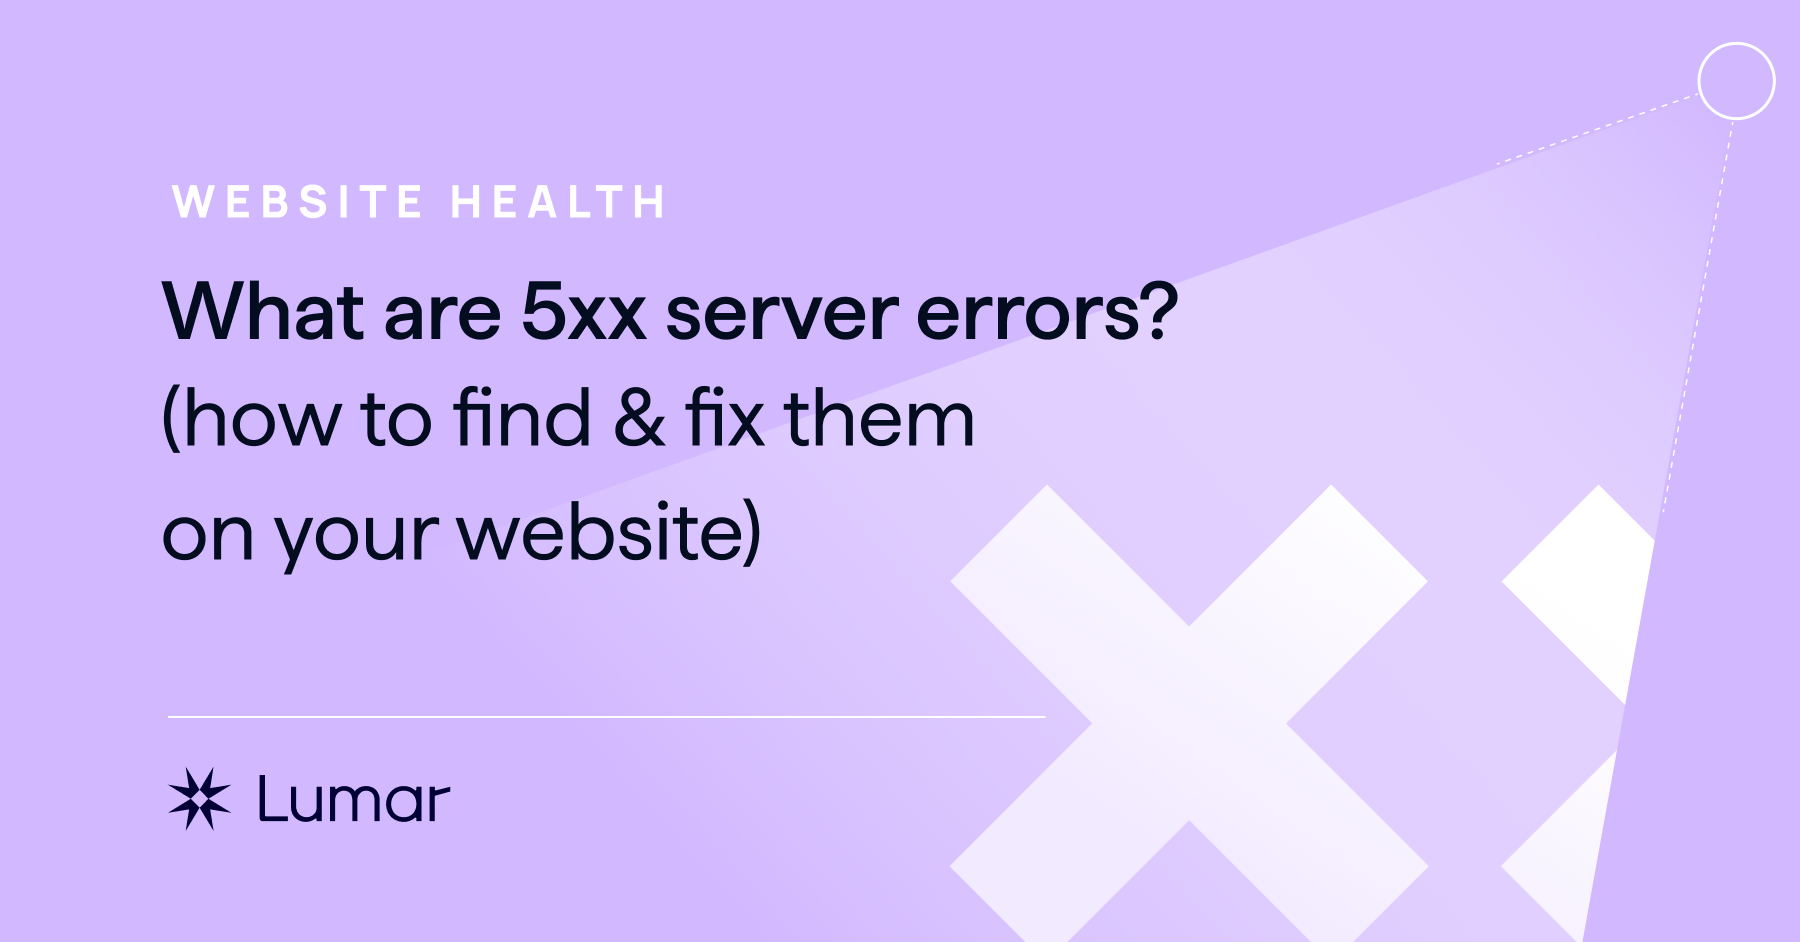 What are 5xx server errors? And how do you find and fix 5xx errors on your website?